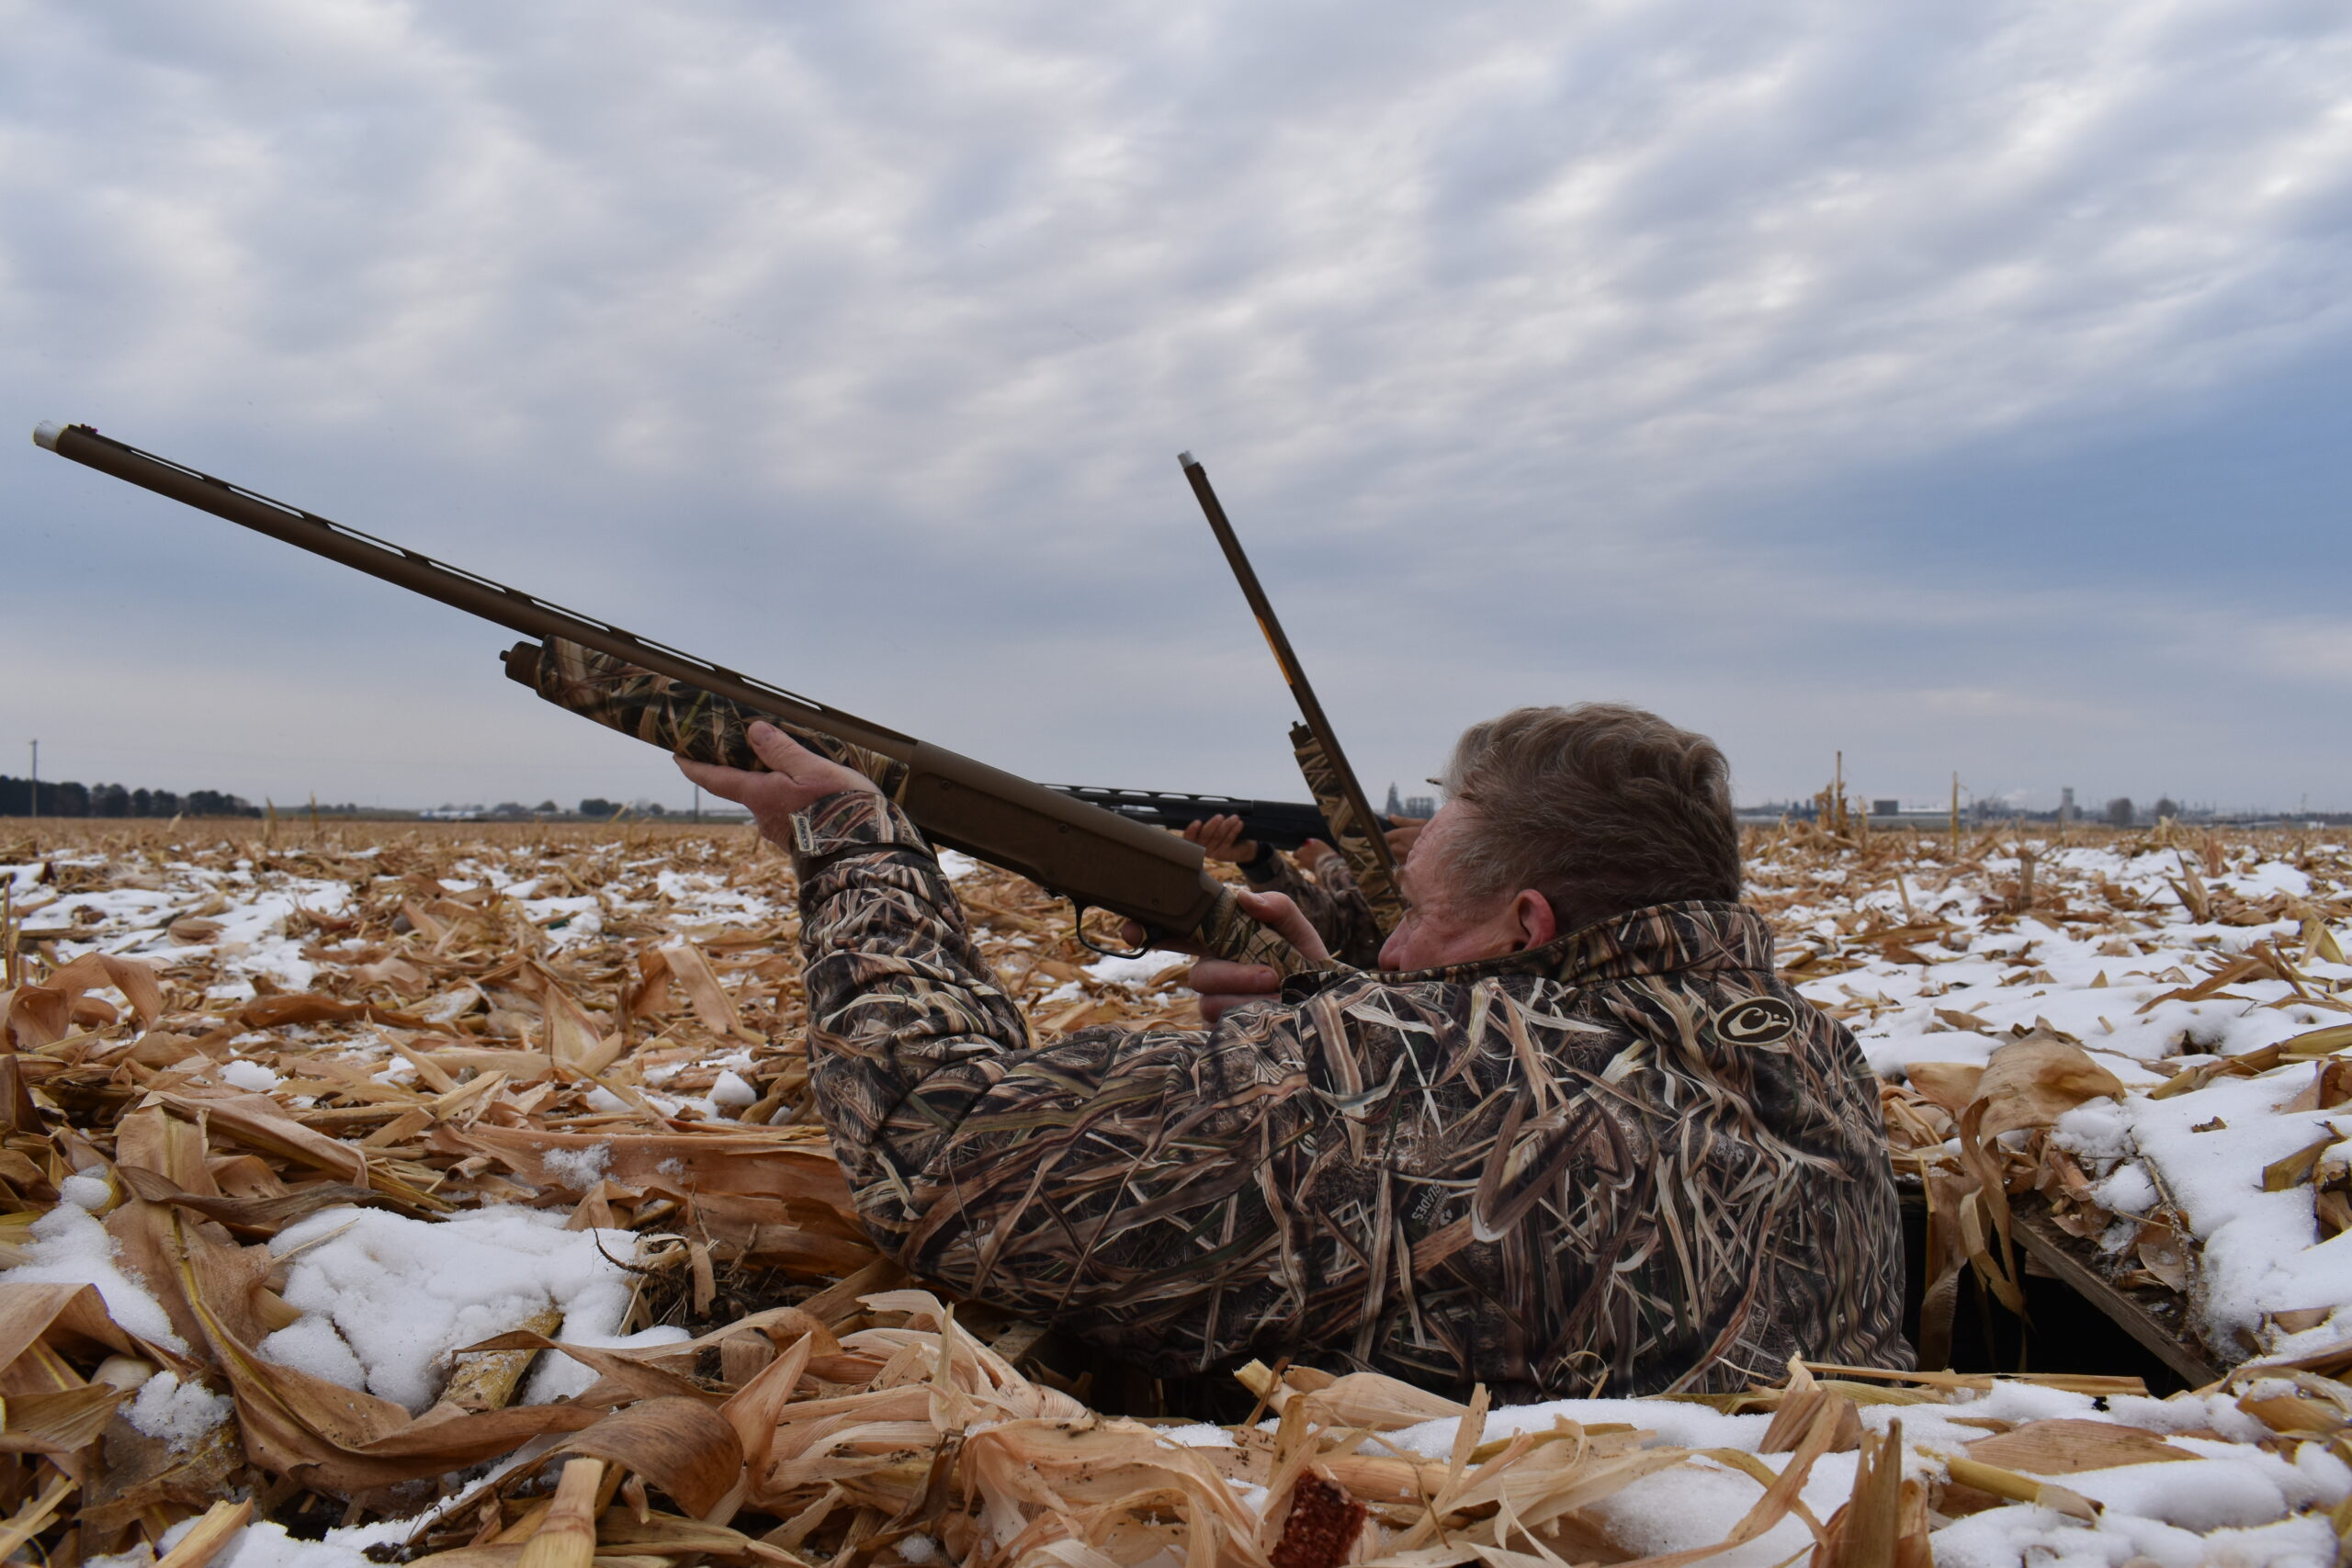 More outfitters means more pressure on birds.